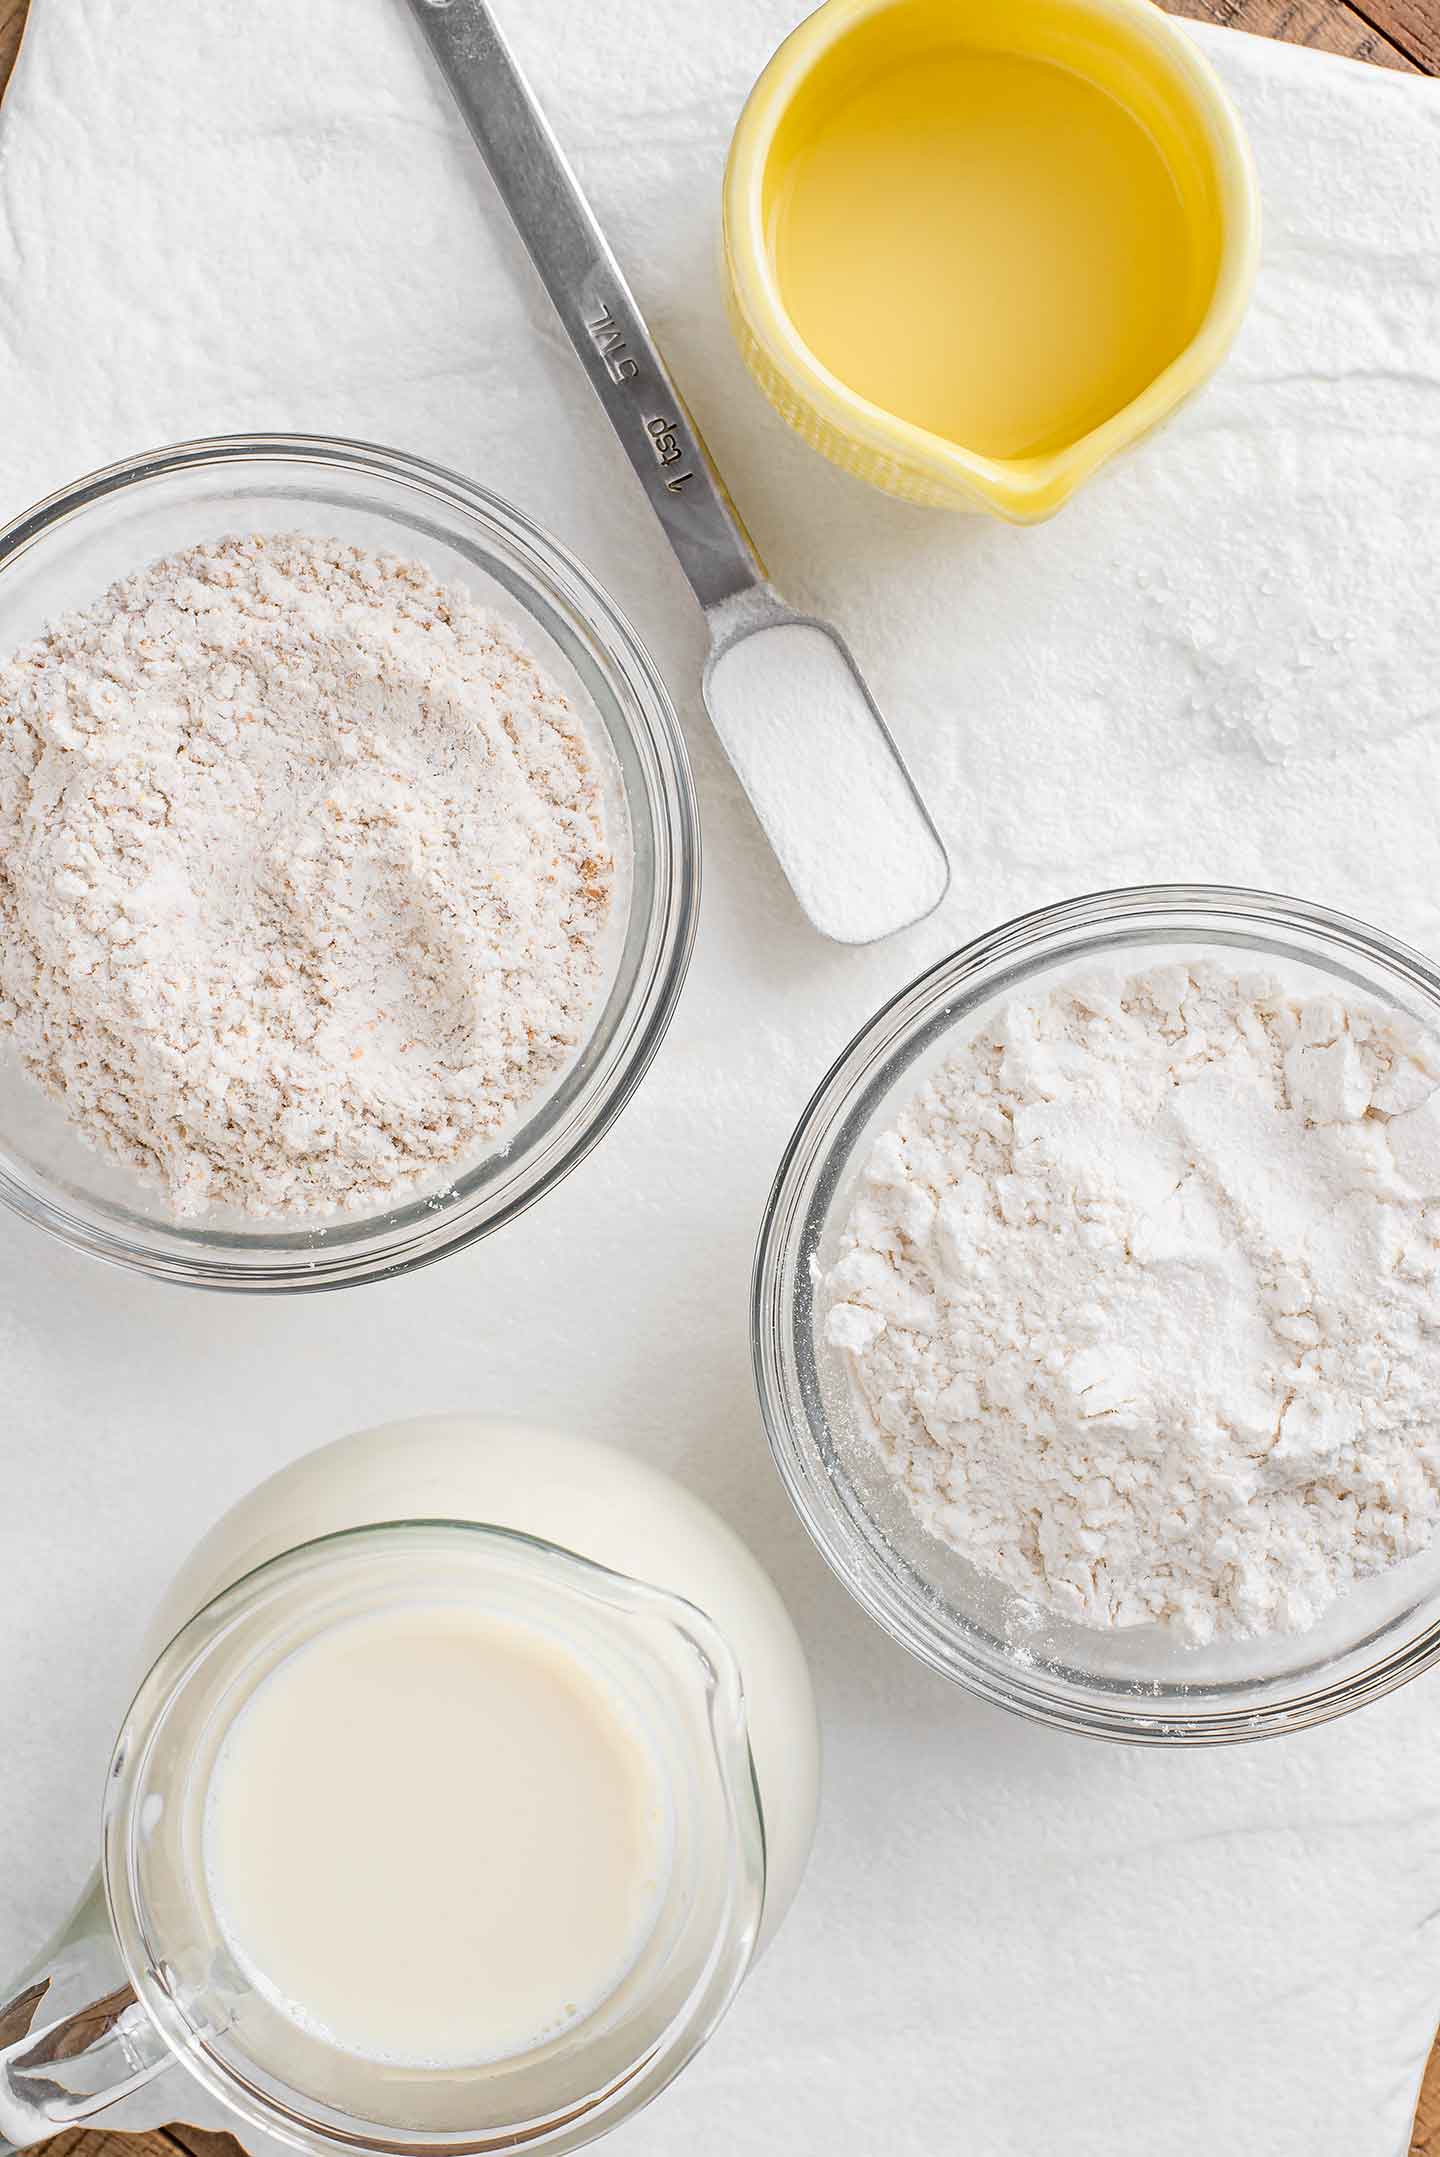 Top down view of ingredients on a white tray. Small bowls of white and whole wheat flour, soy milk, lemon juice, salt, and a teaspoon of baking soda are pictured.